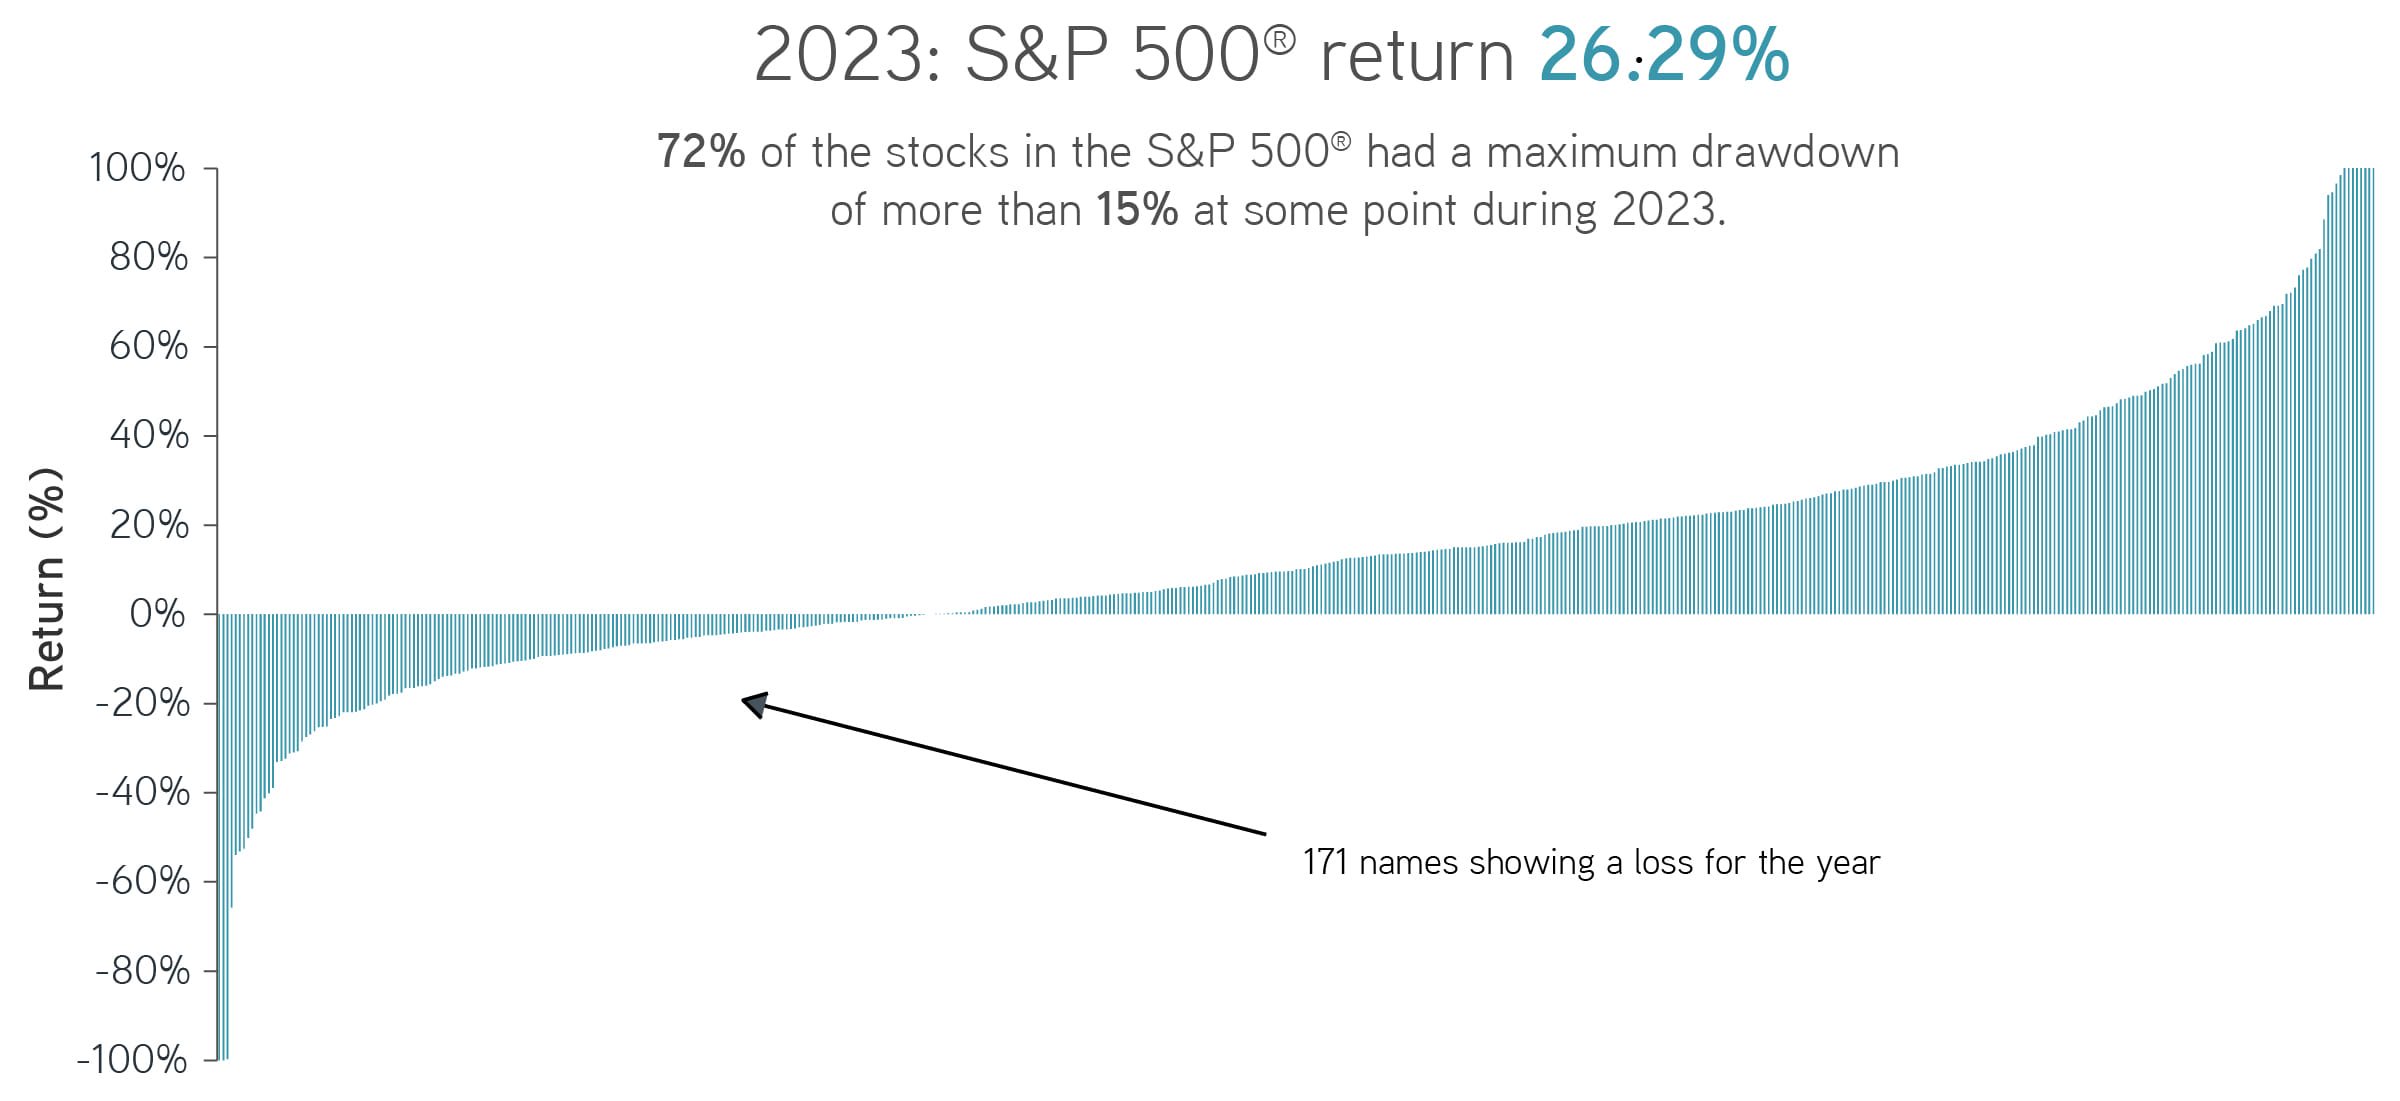 S&P 500® performance in 2023